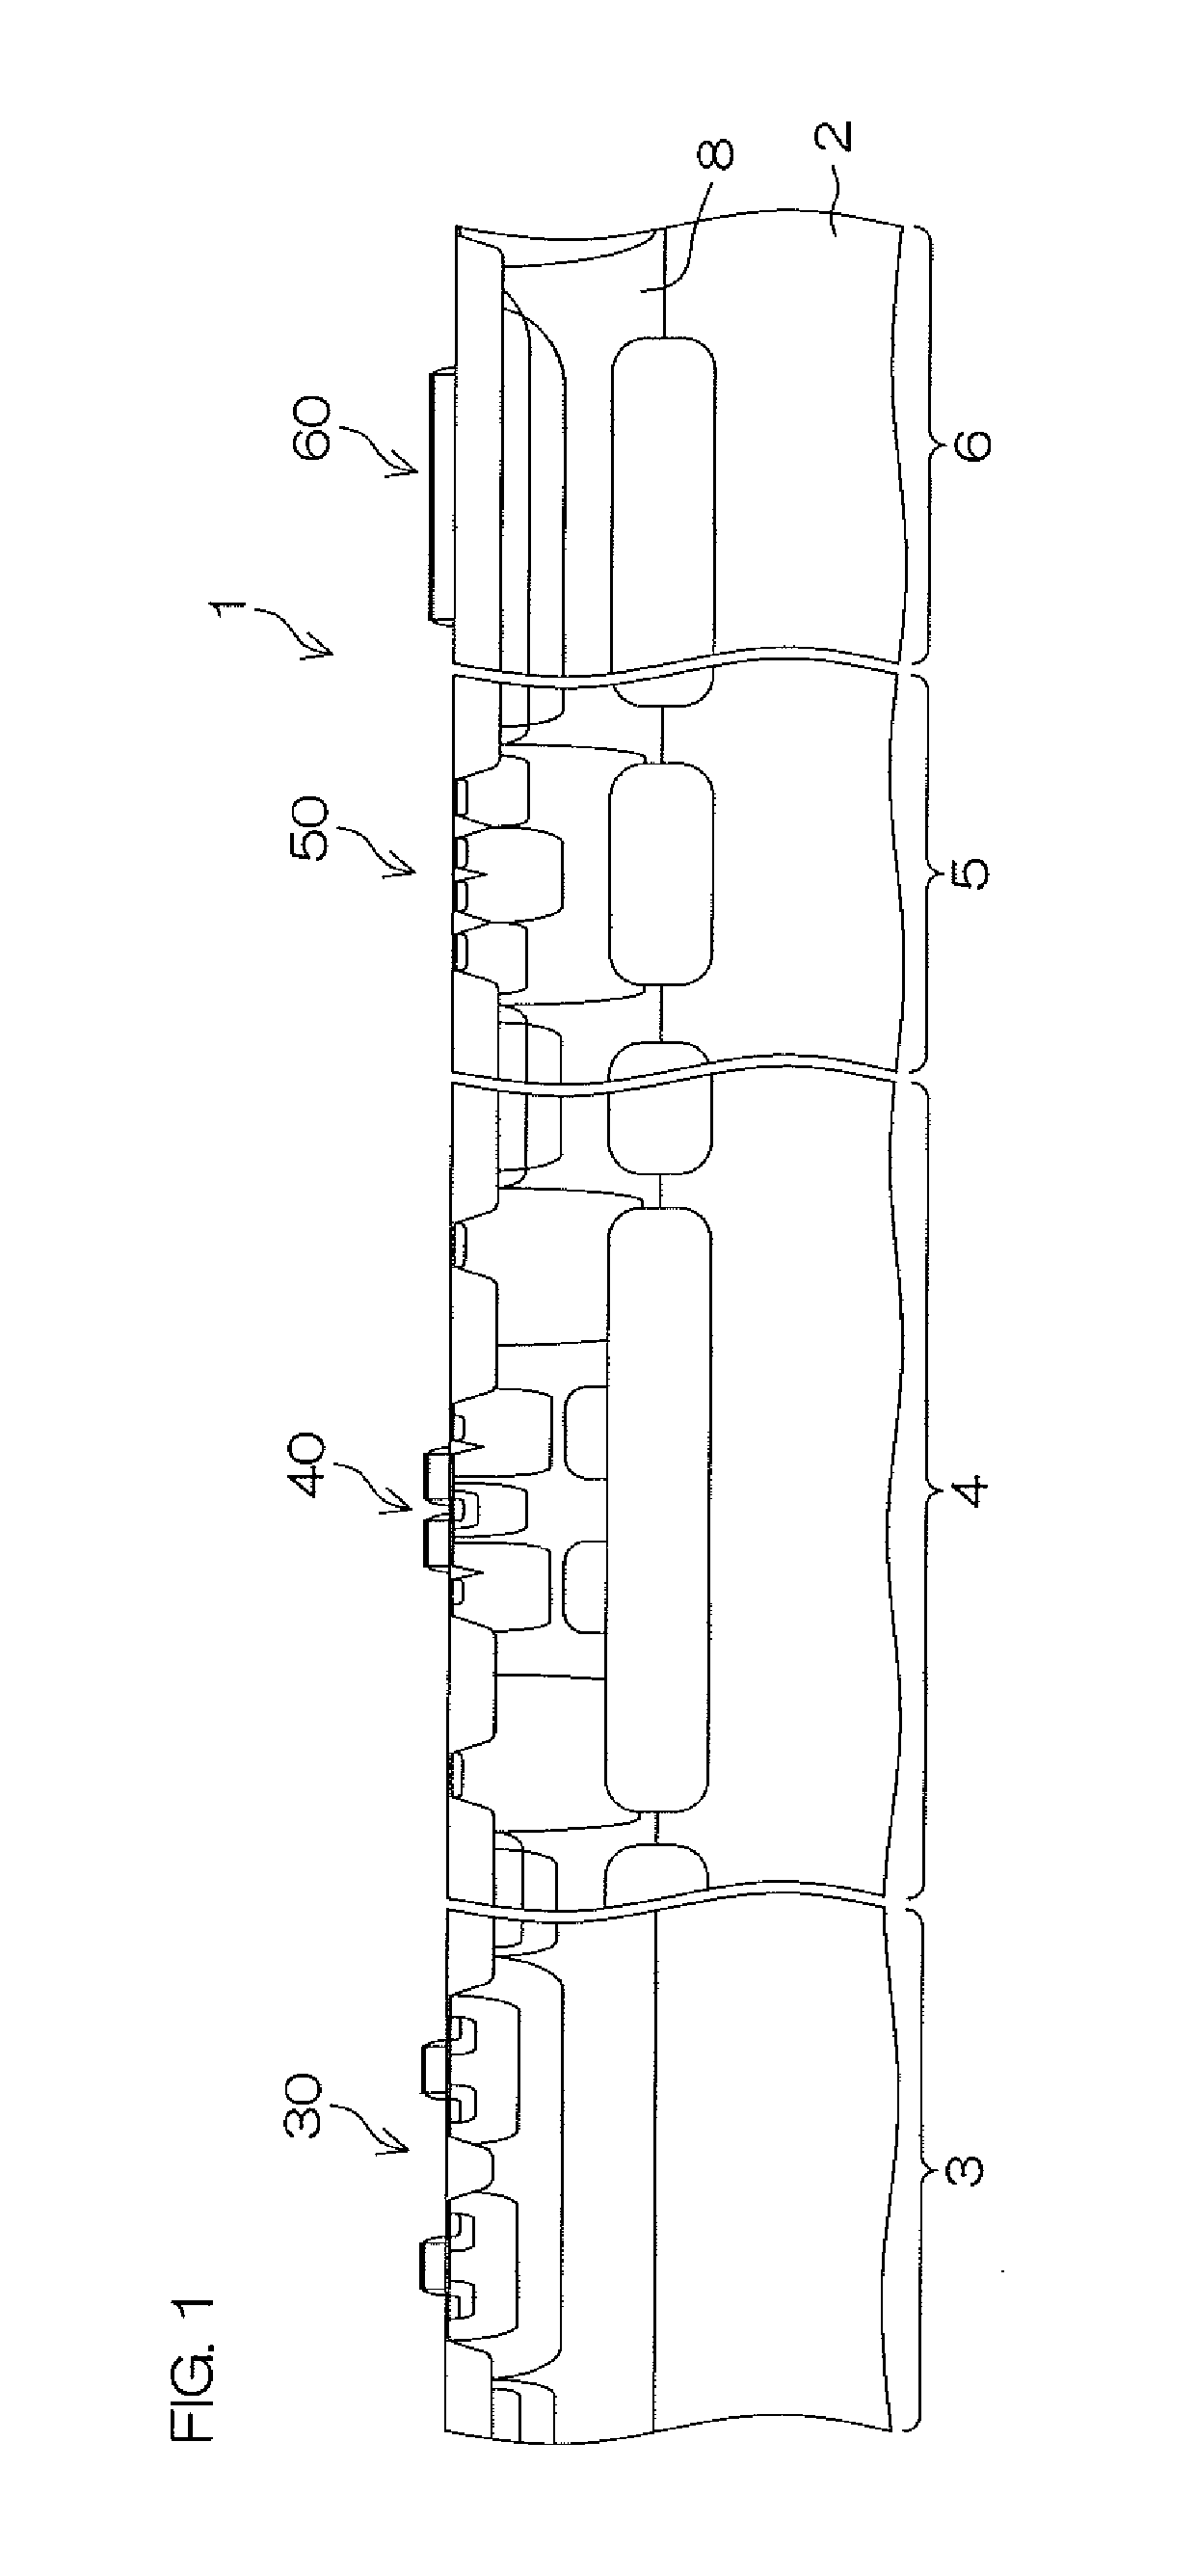 N-channel double diffusion mos transistor, and semiconductor composite device